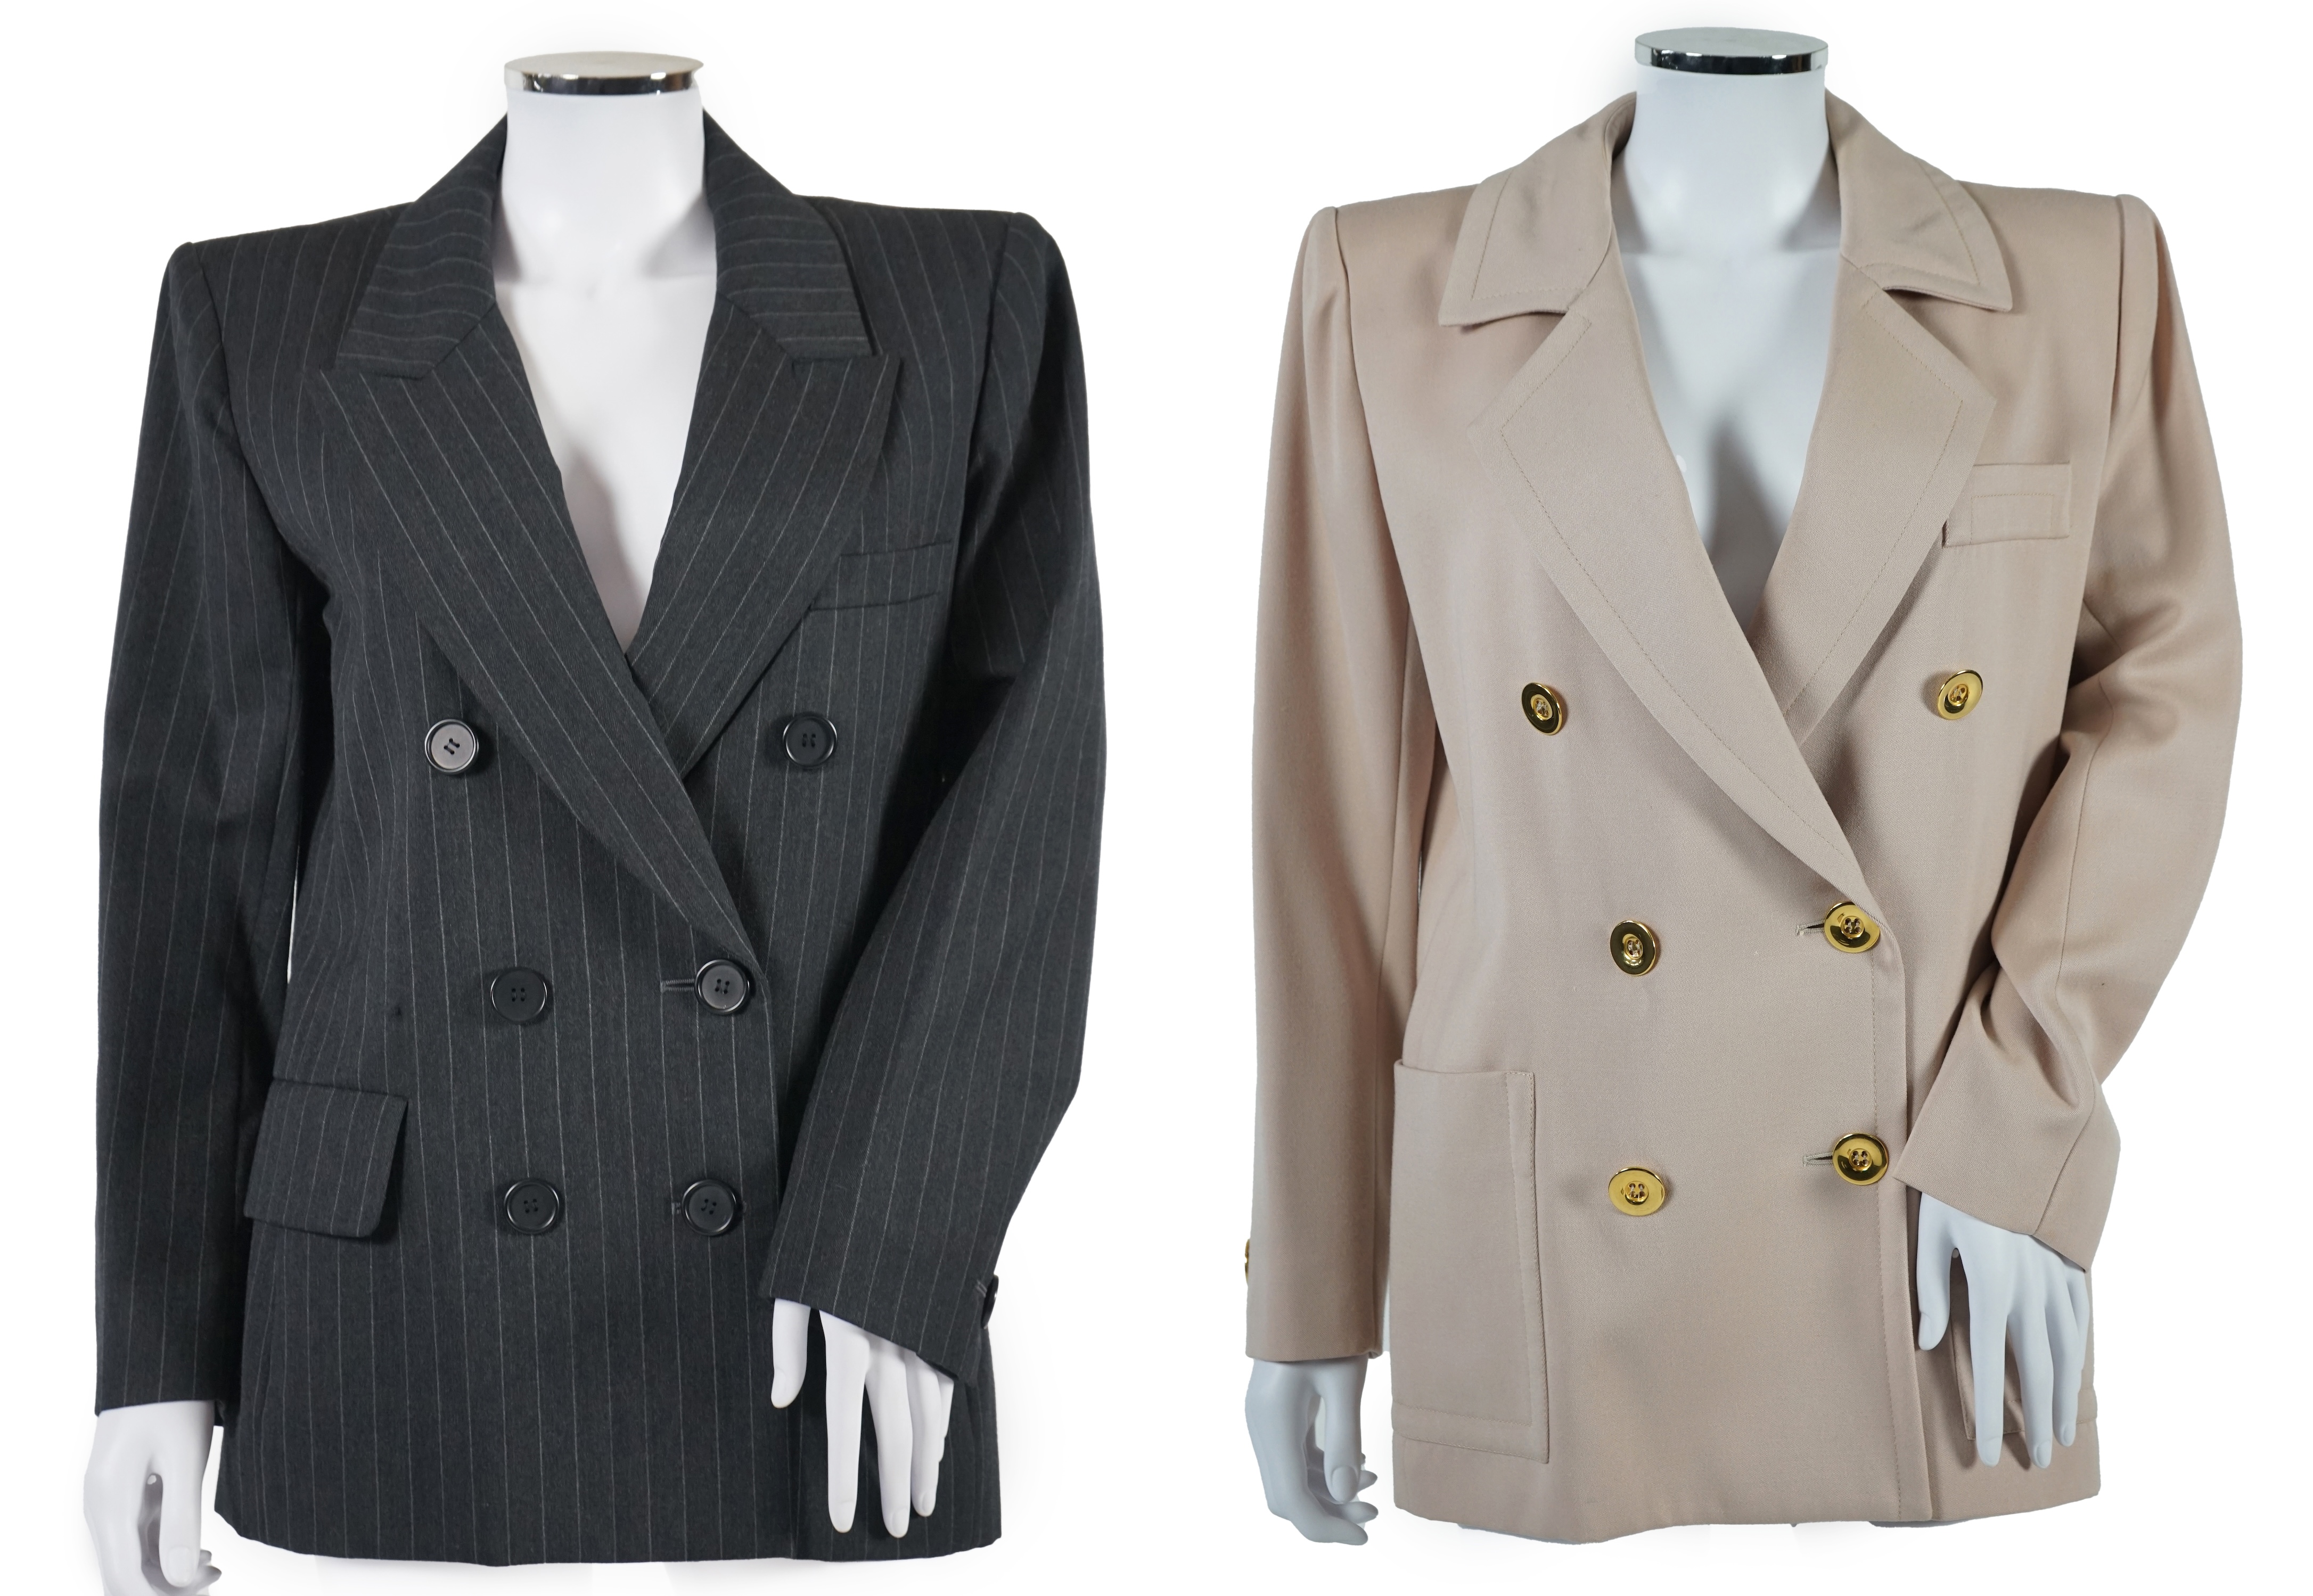 Two vintage Yves Saint Laurent variation lady's suits with both matching skirt and trousers, F 38 (UK 10). Please note alterations to make the waist smaller may have been carried out on some of the skirts. Proceeds to Ha